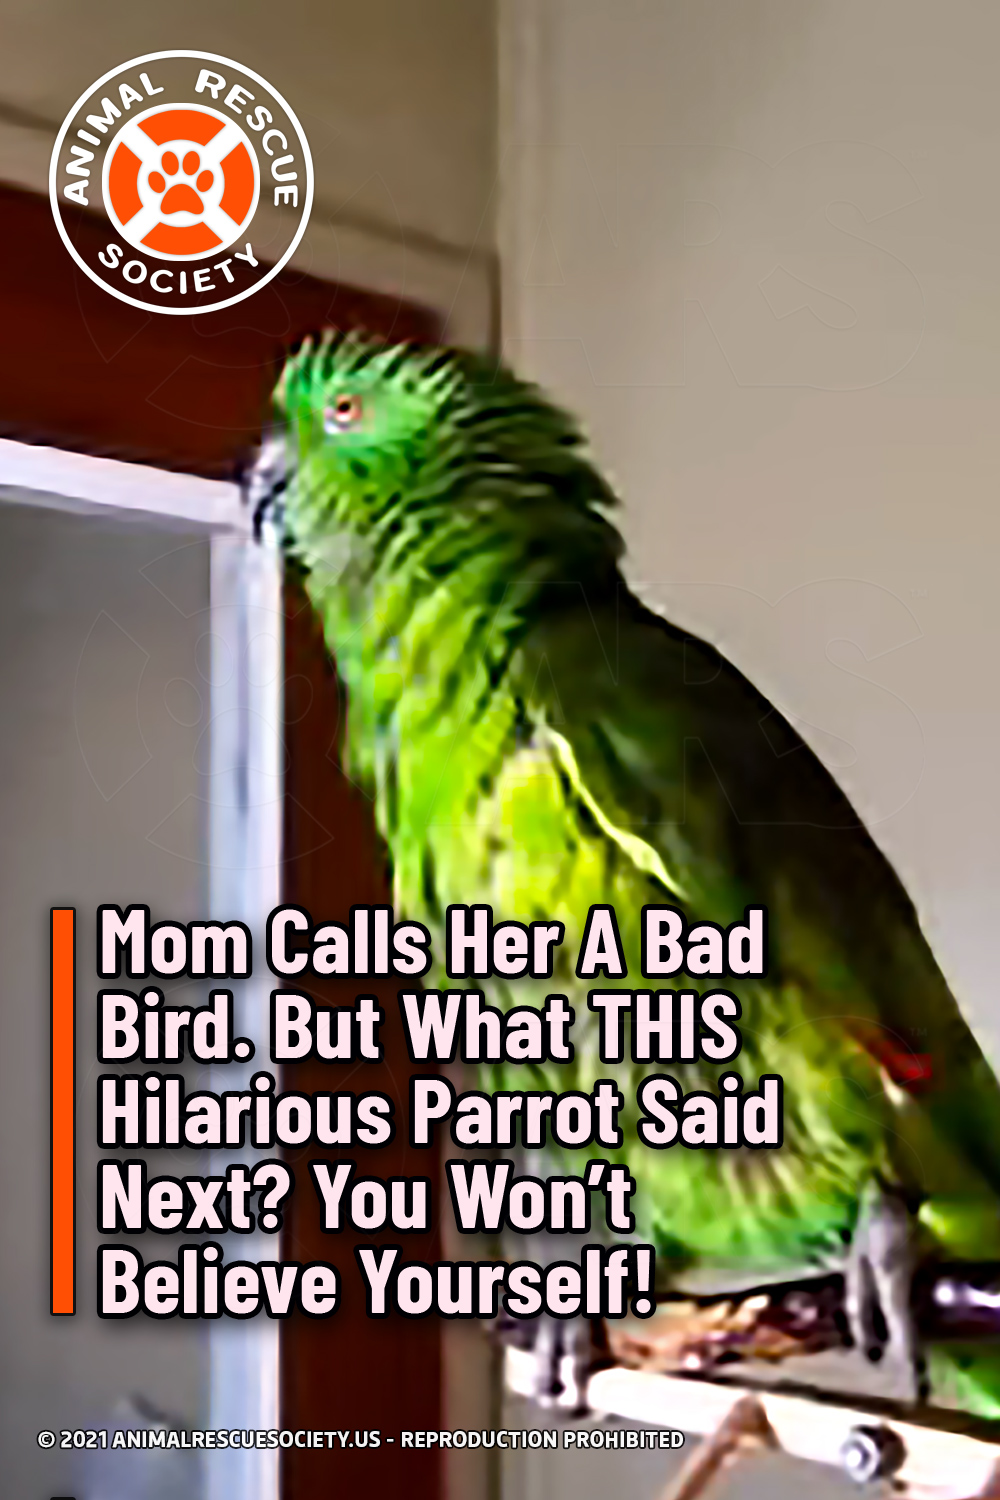 Mom Calls Her A Bad Bird. But What THIS Hilarious Parrot Said Next? You Won’t Believe Yourself!